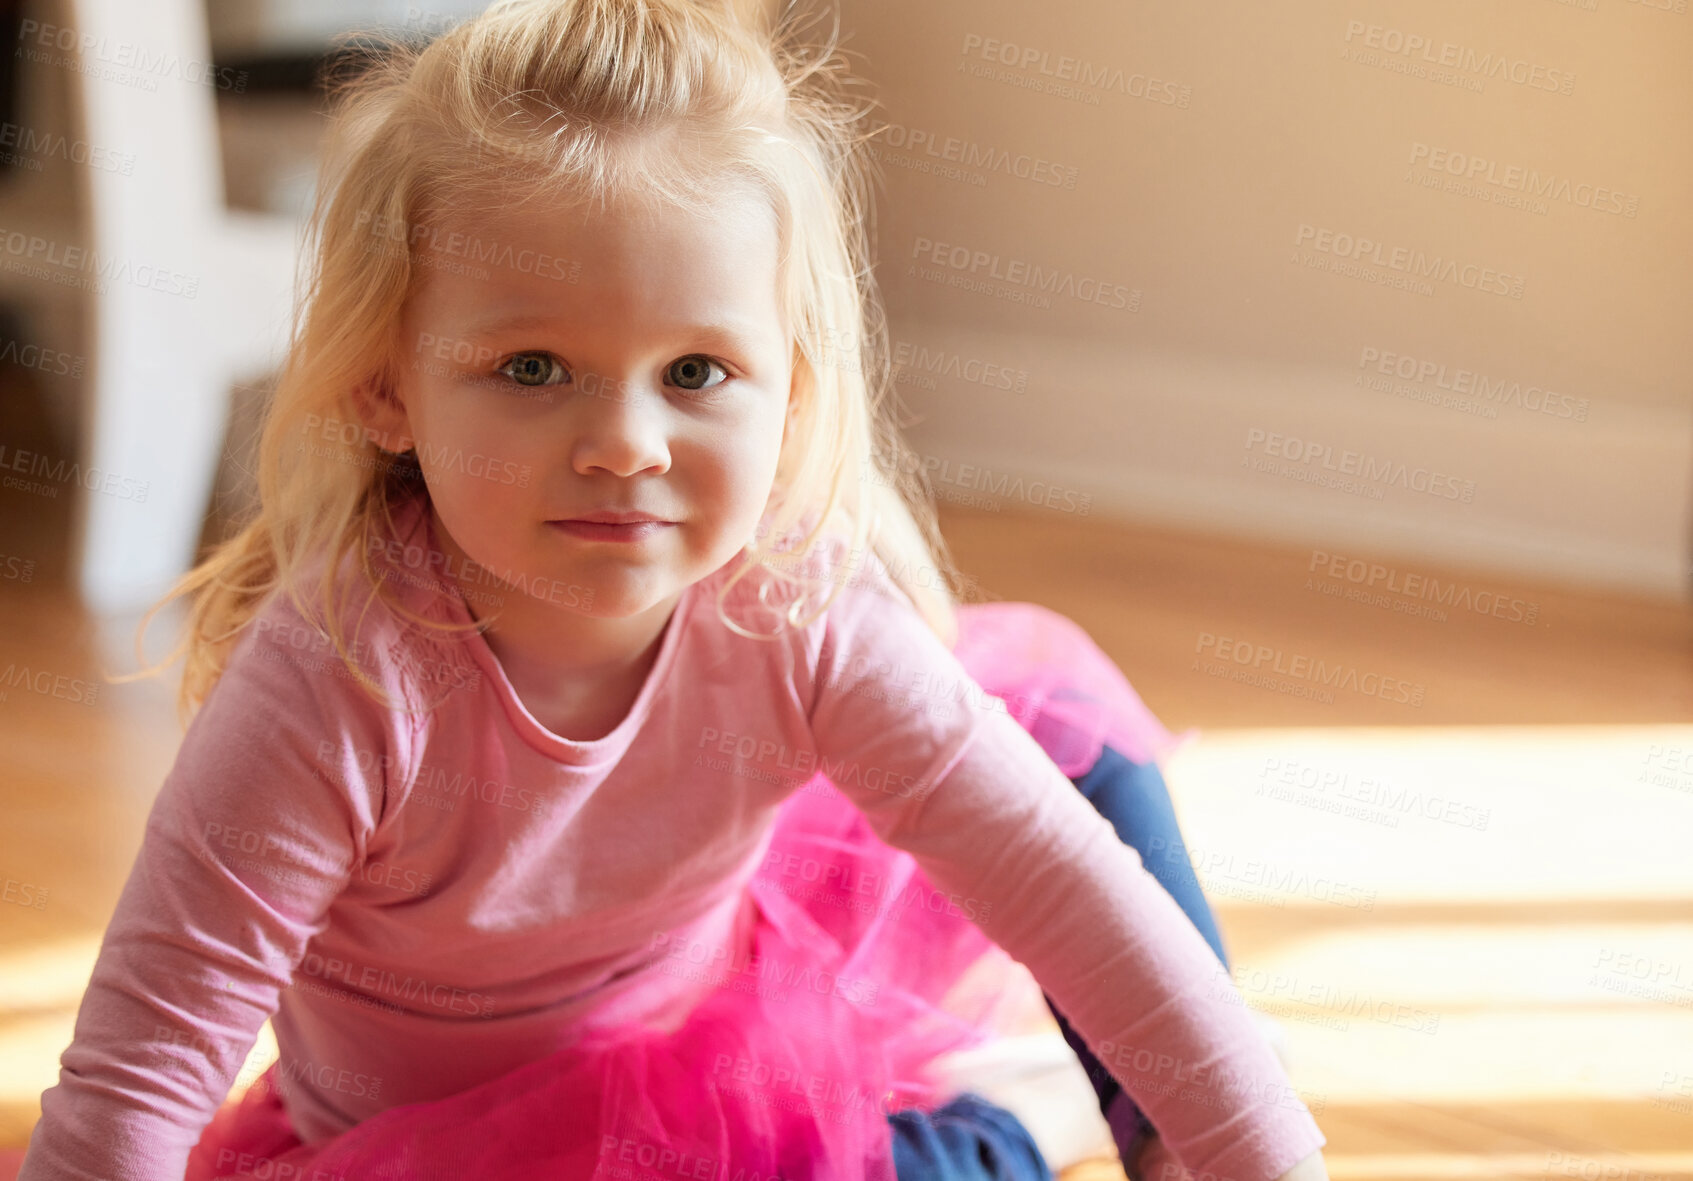 Buy stock photo Shot of an adorable little girl sitting on the floor in her bedroom